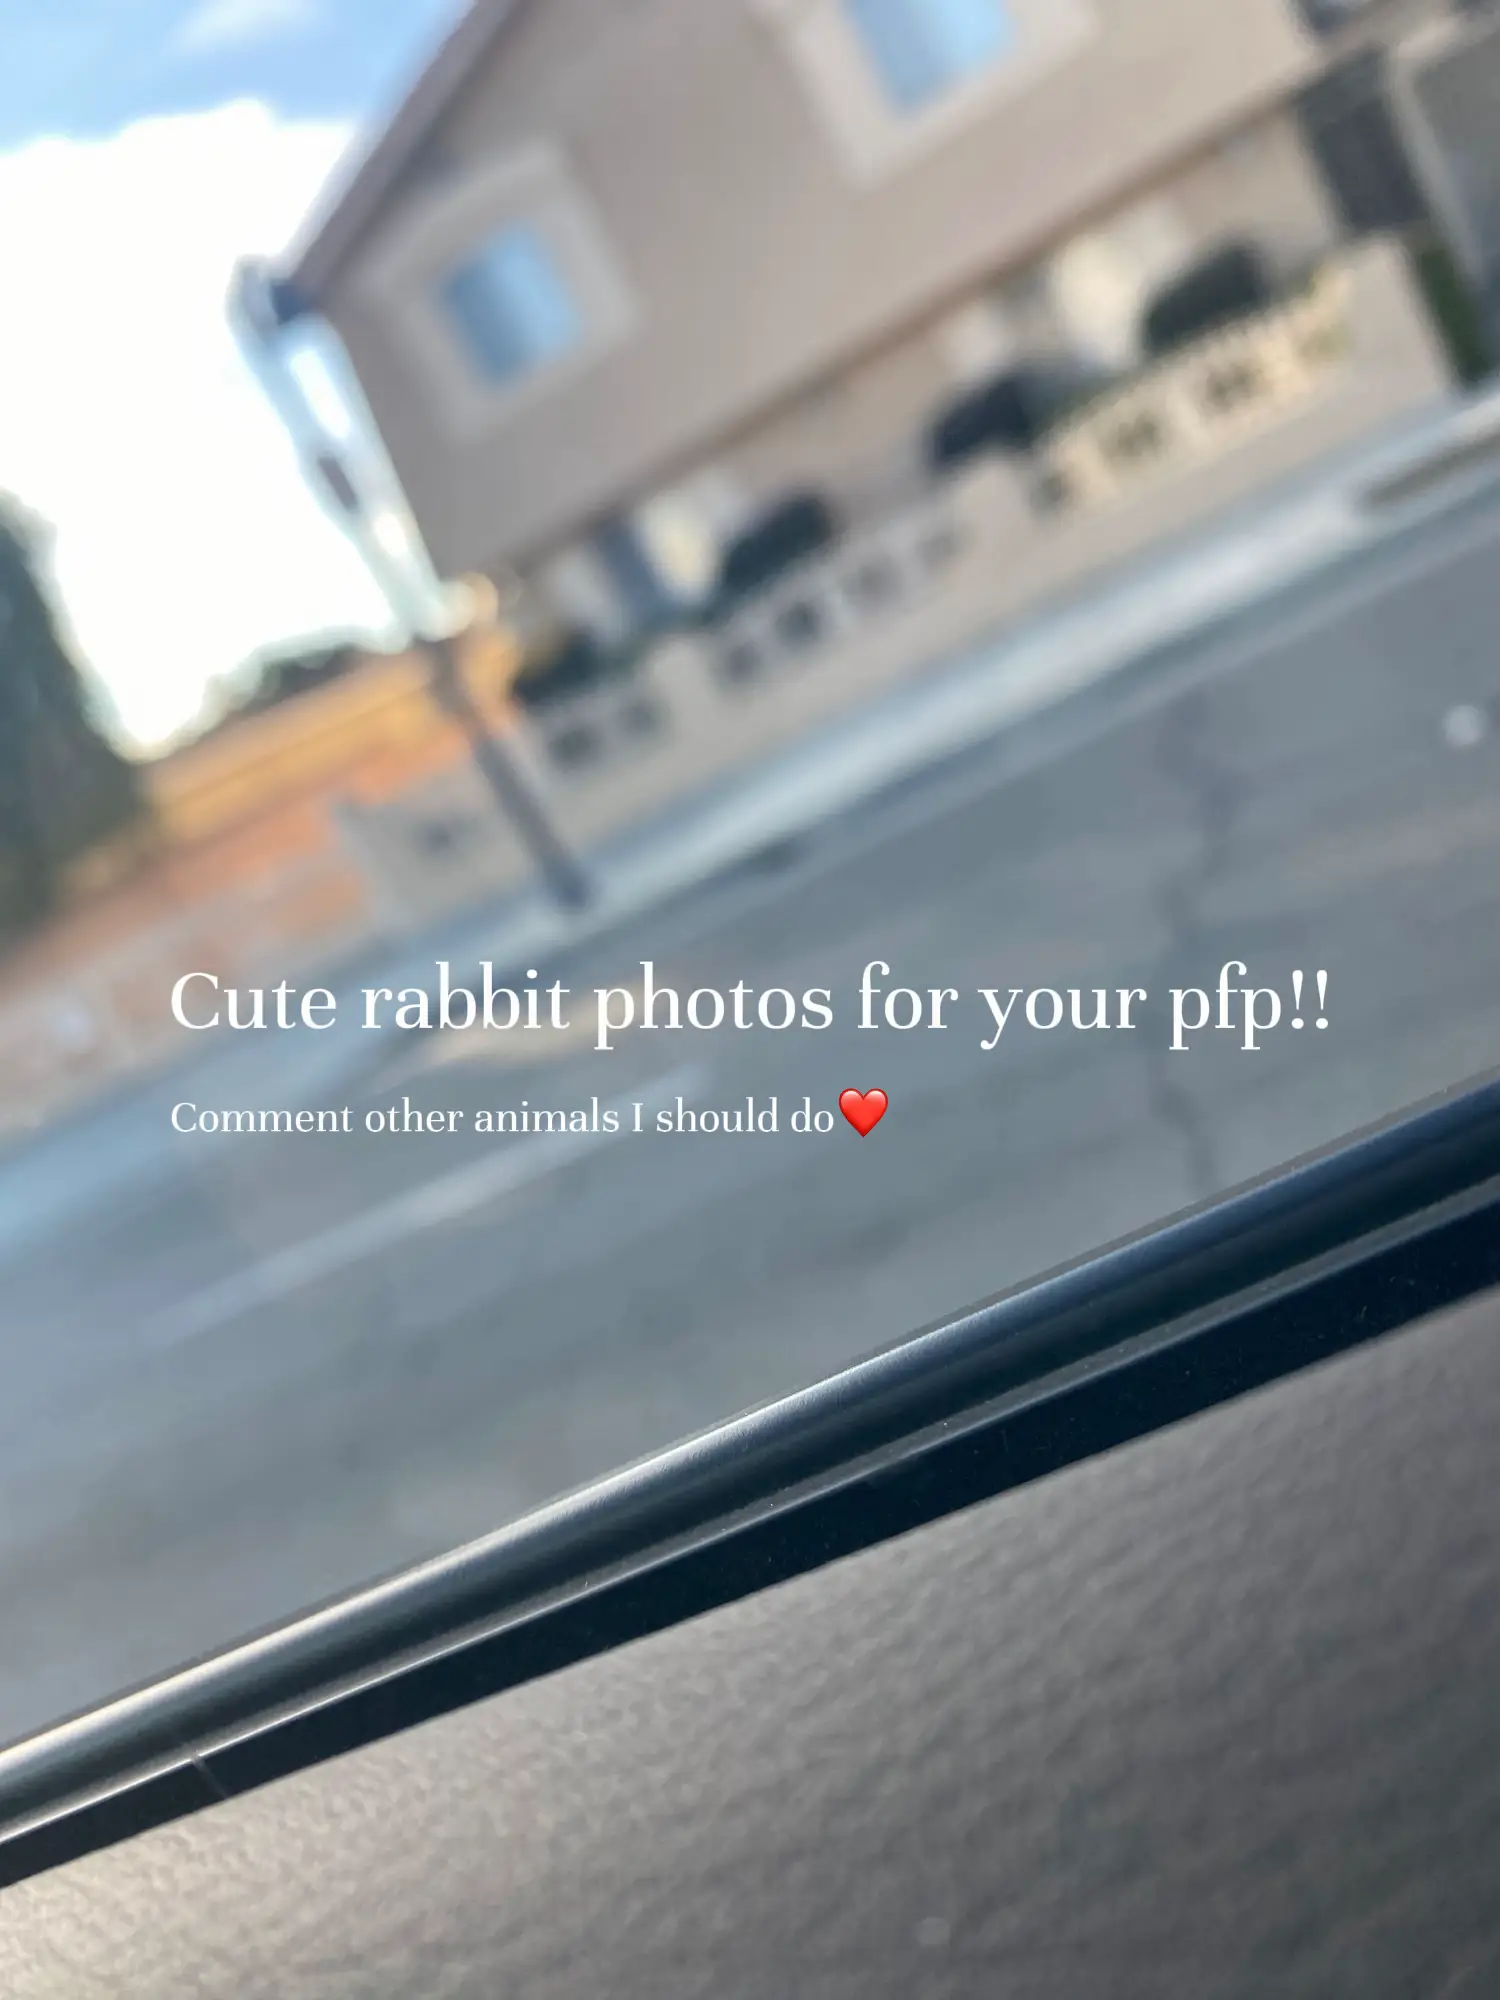 Cute Bunny Pictures for Instagram - Lemon8 Search